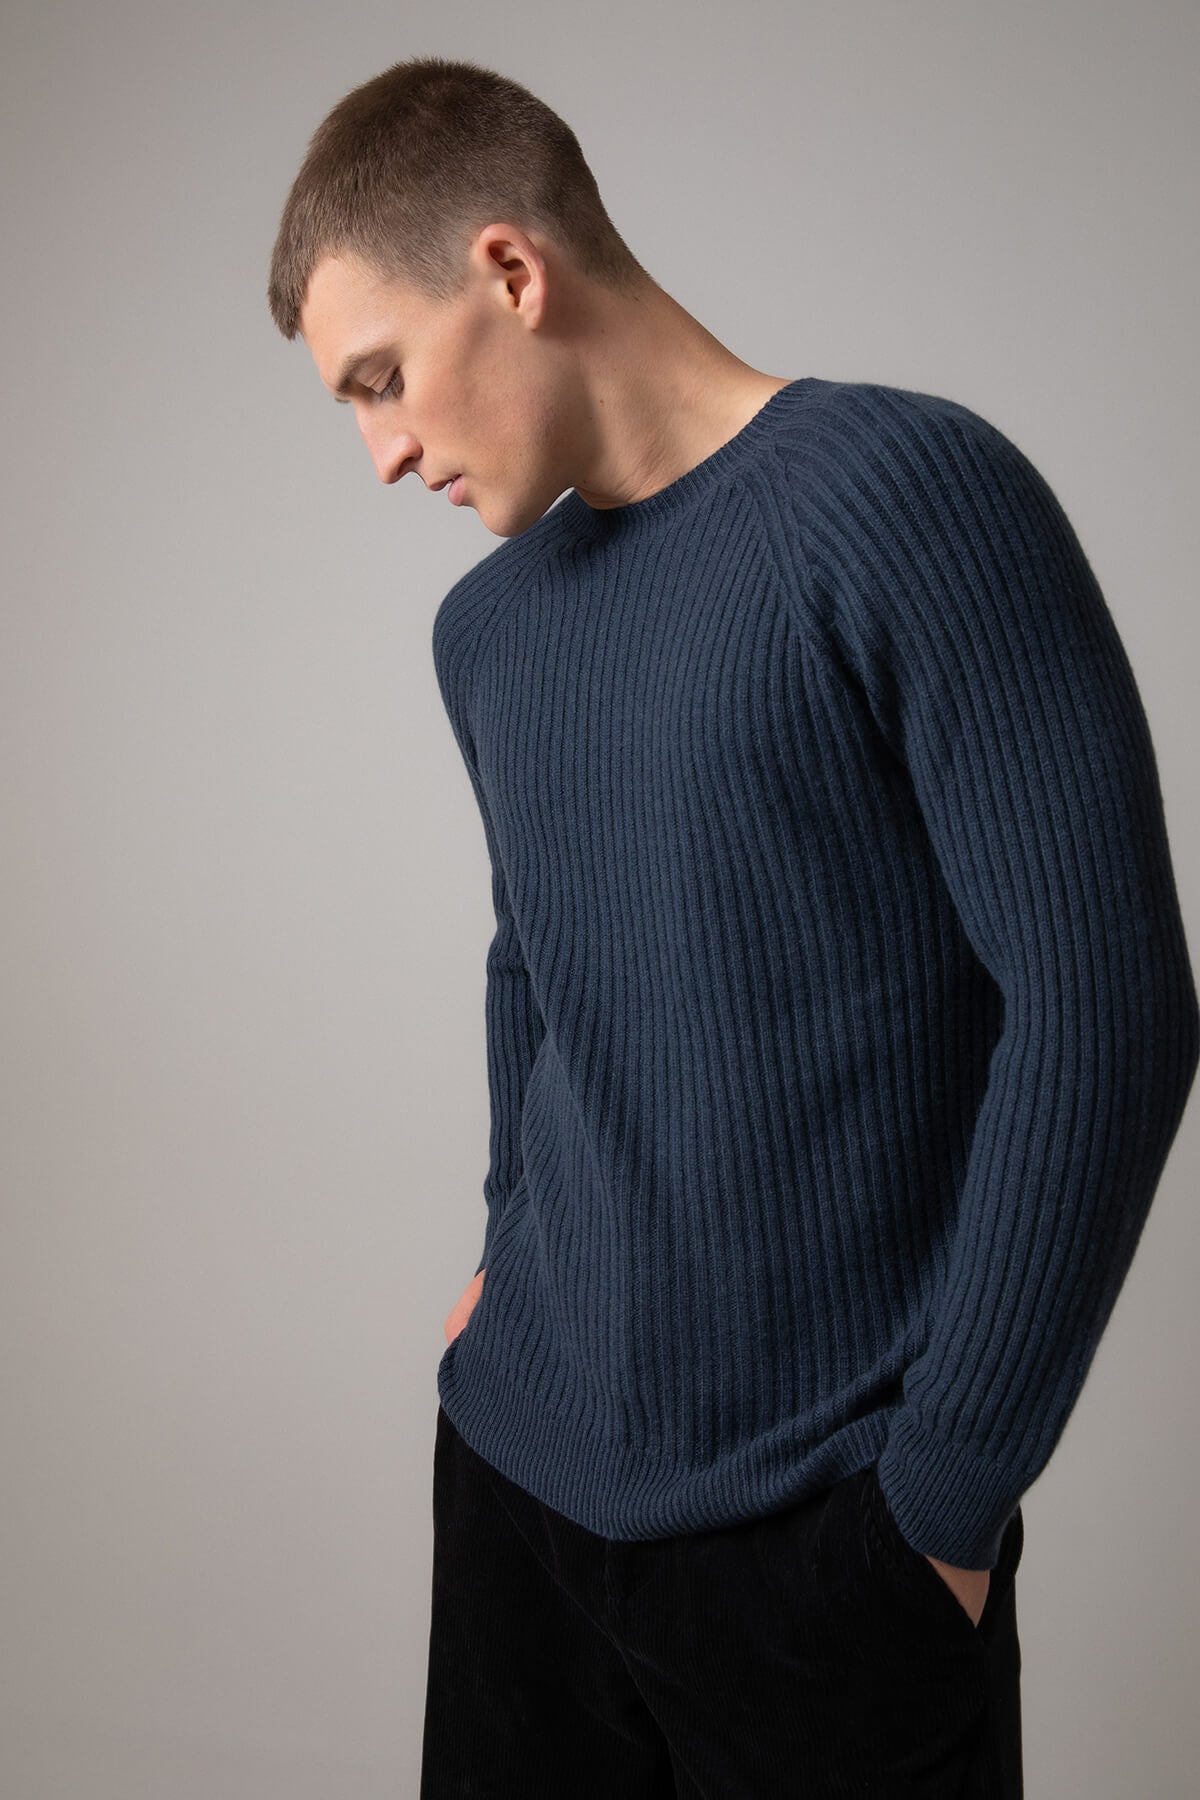 Johnstons of Elgin’s Men's Ribbed Cashmere Round Neck Jumper in Mazarine blue on model wearing black trousers on a grey background KAI05105SD7351